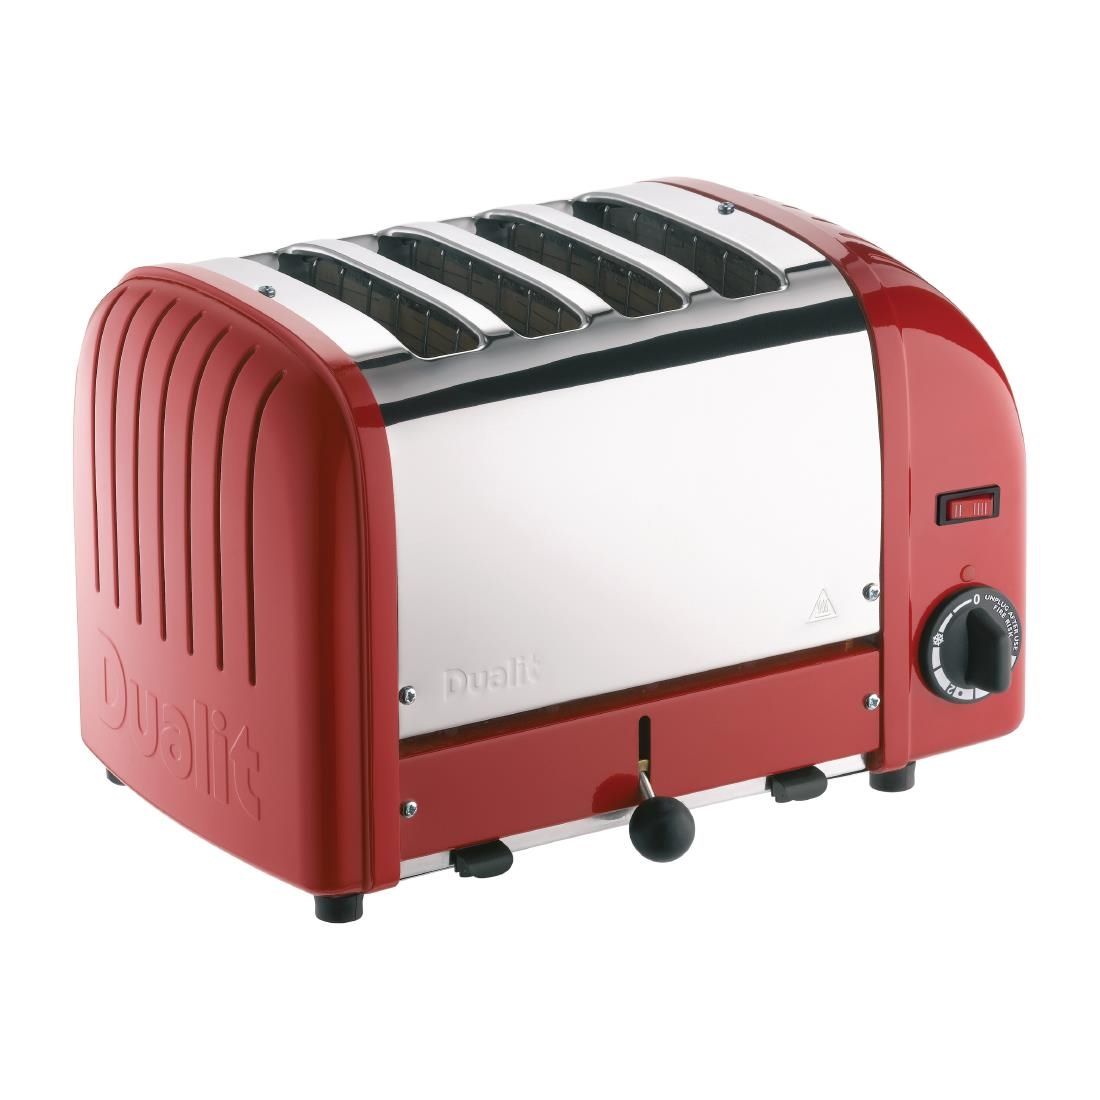 GD394 Dualit 4 Slice Vario Toaster Red 40353 JD Catering Equipment Solutions Ltd